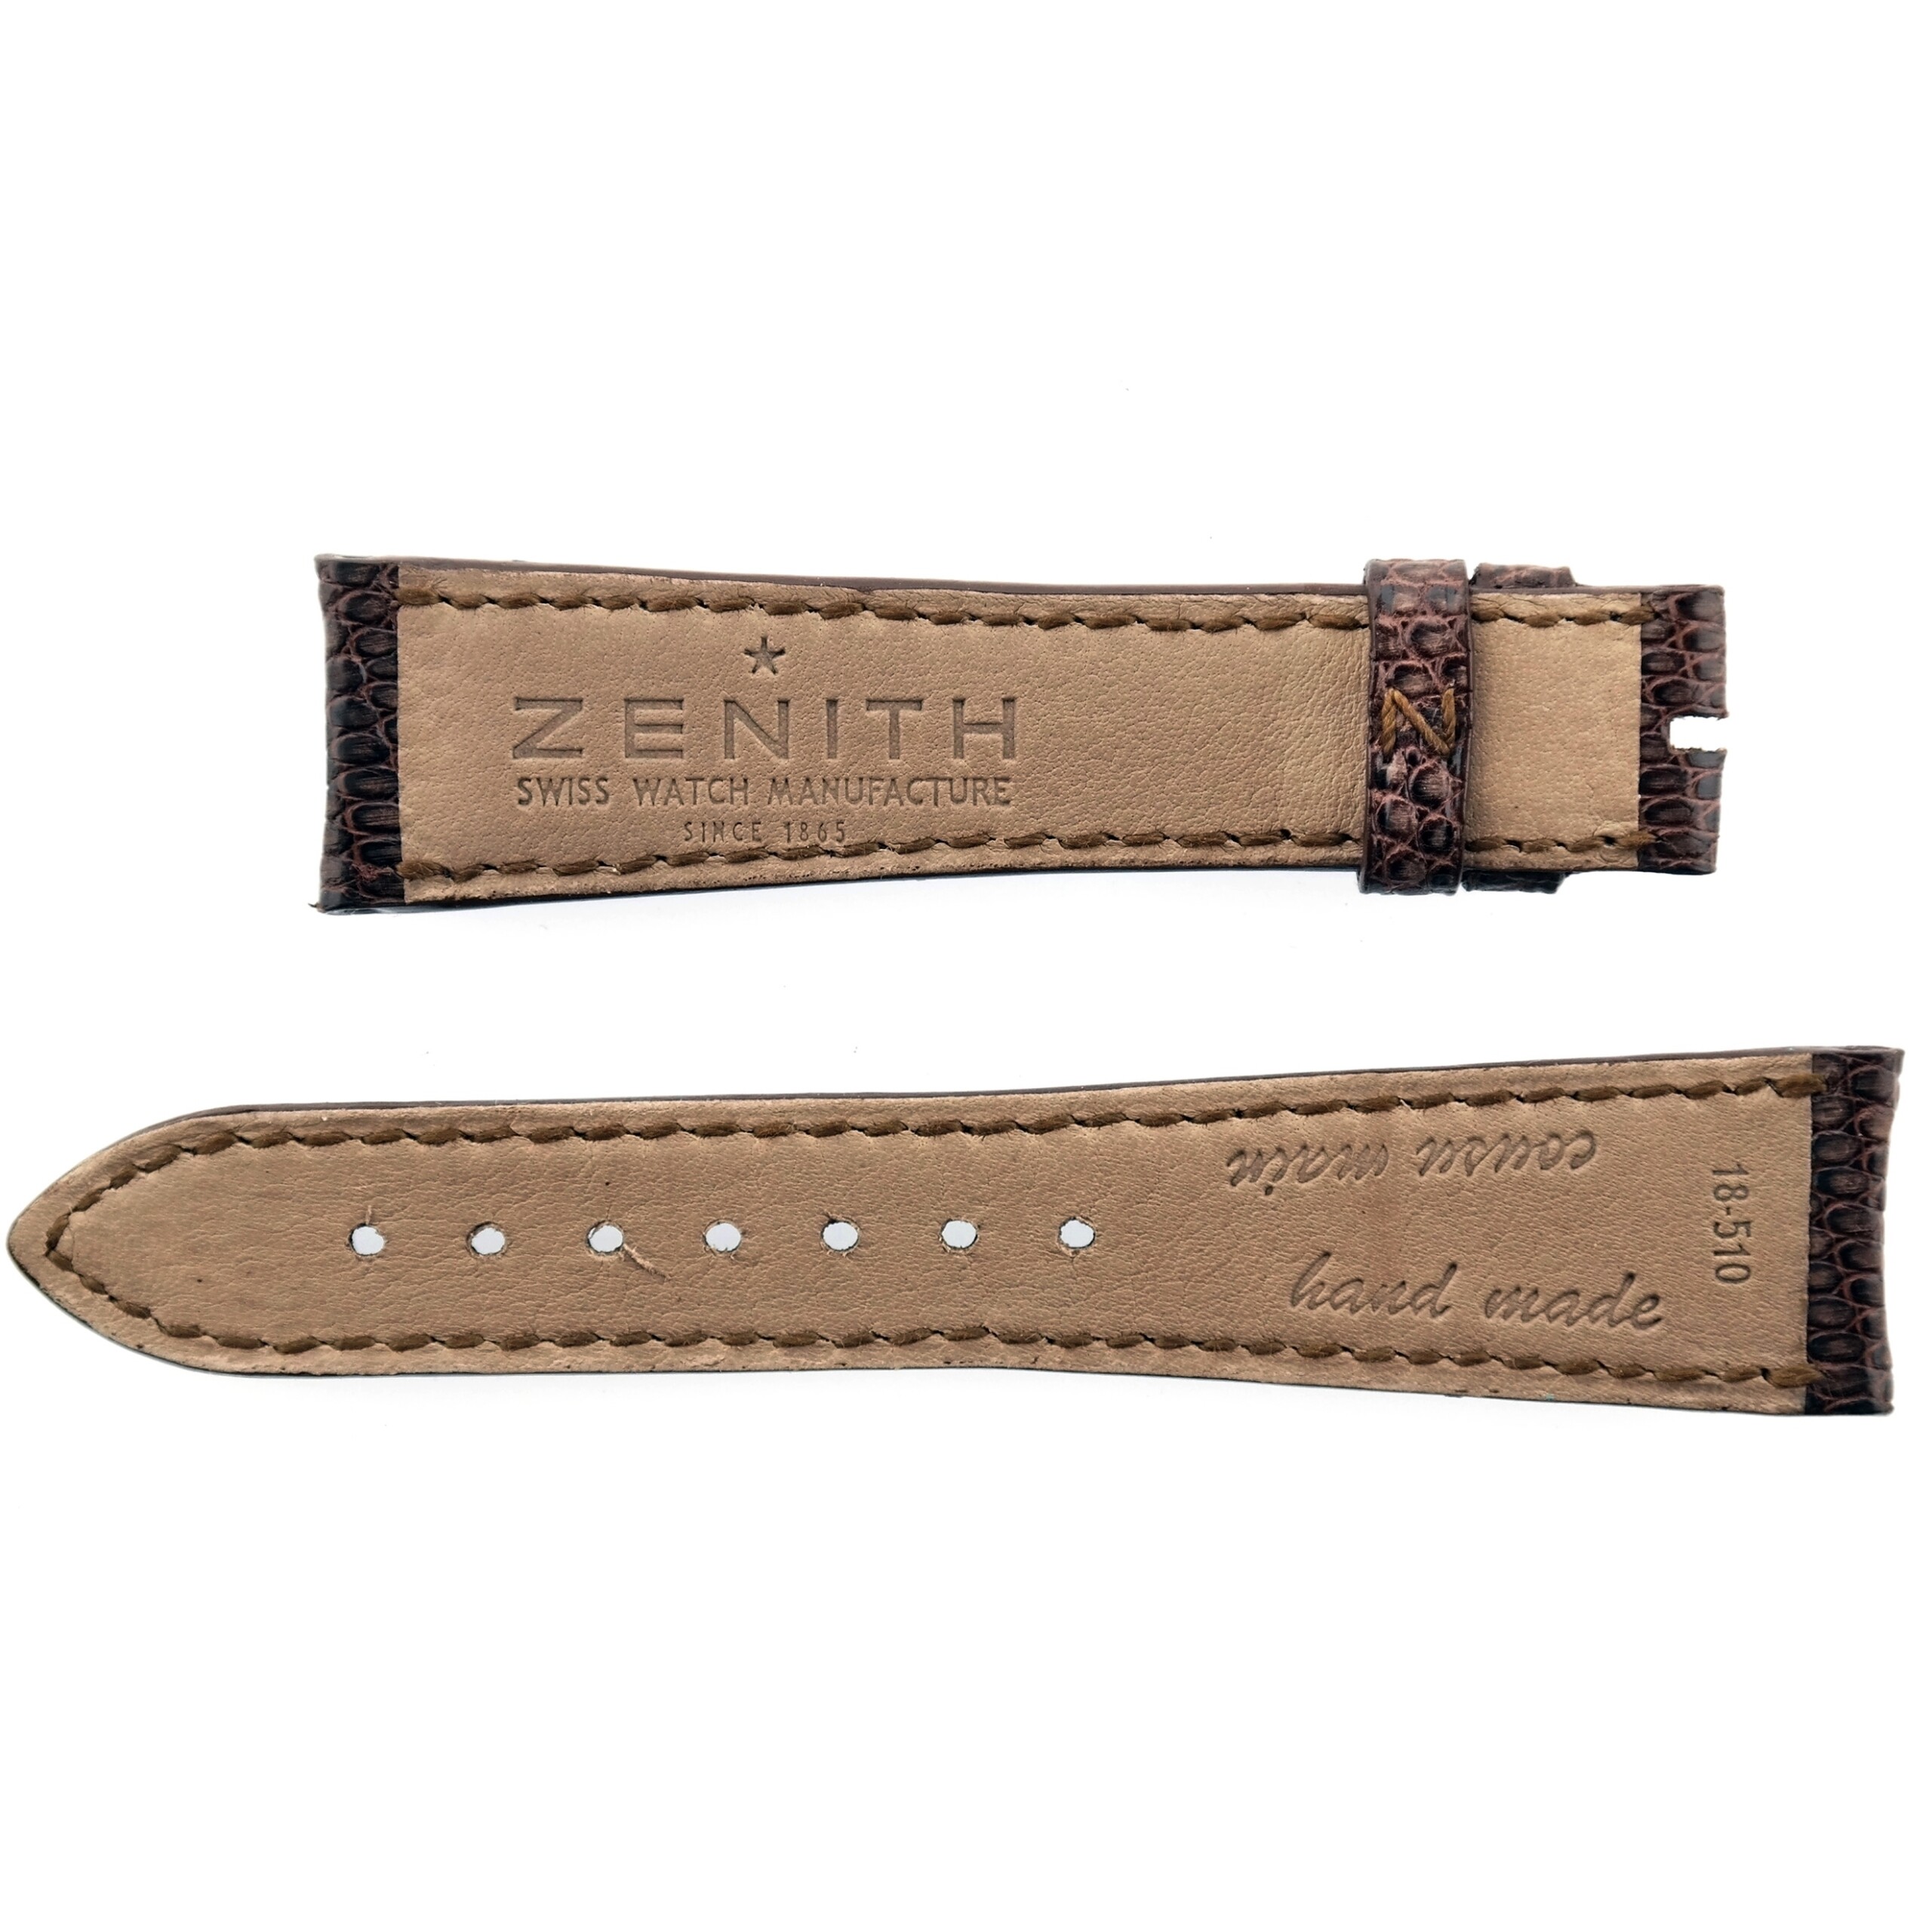 Authentic ZENITH - 18-510 - Leather Watch Strap - Hand Made - 18 mm